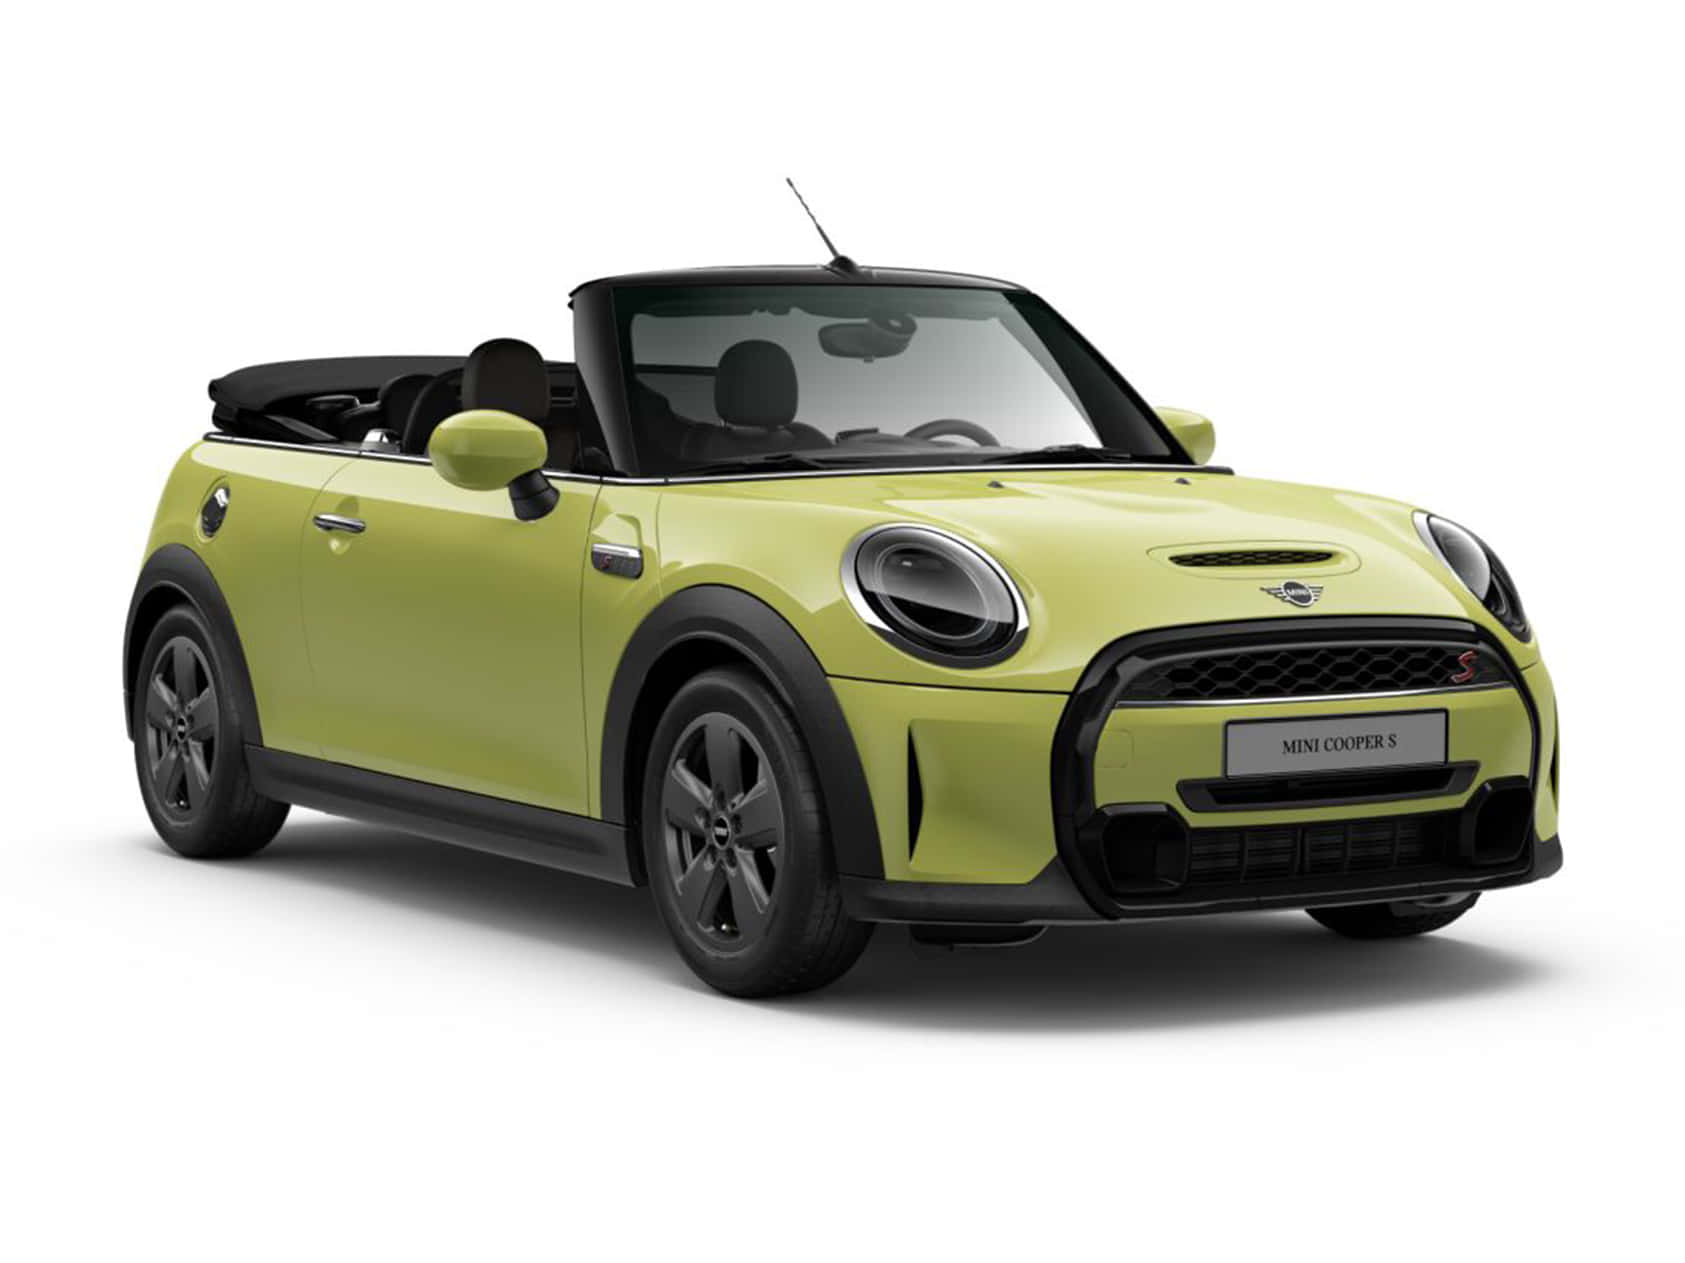 Enjoy open-top driving with the Mini Cooper S Convertible Wallpaper